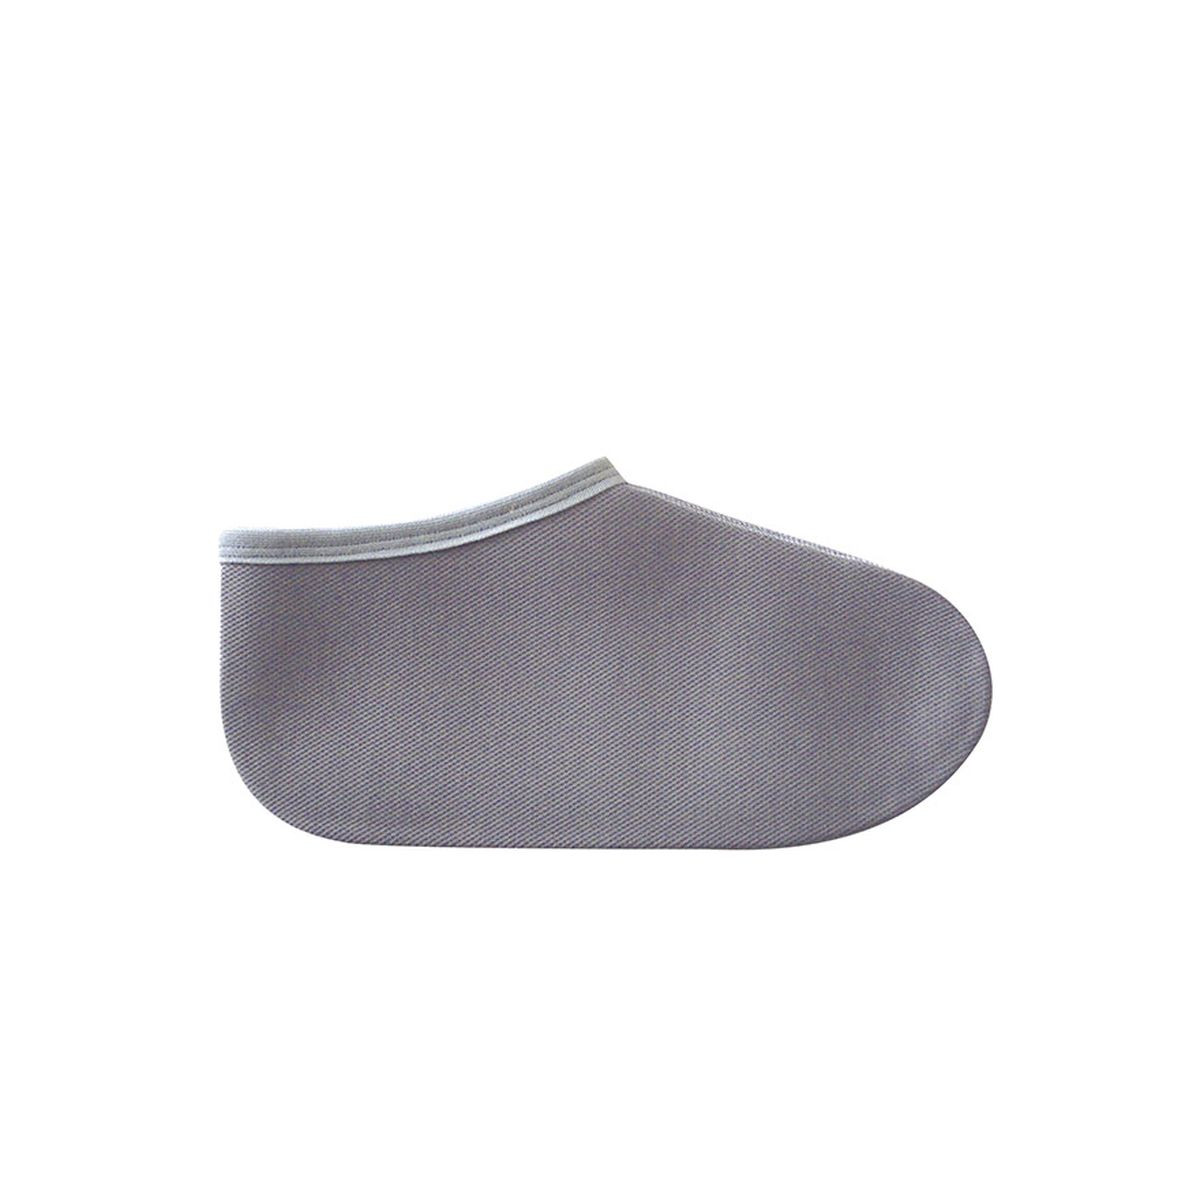 CHAUSSON JERSEY gris T36/37